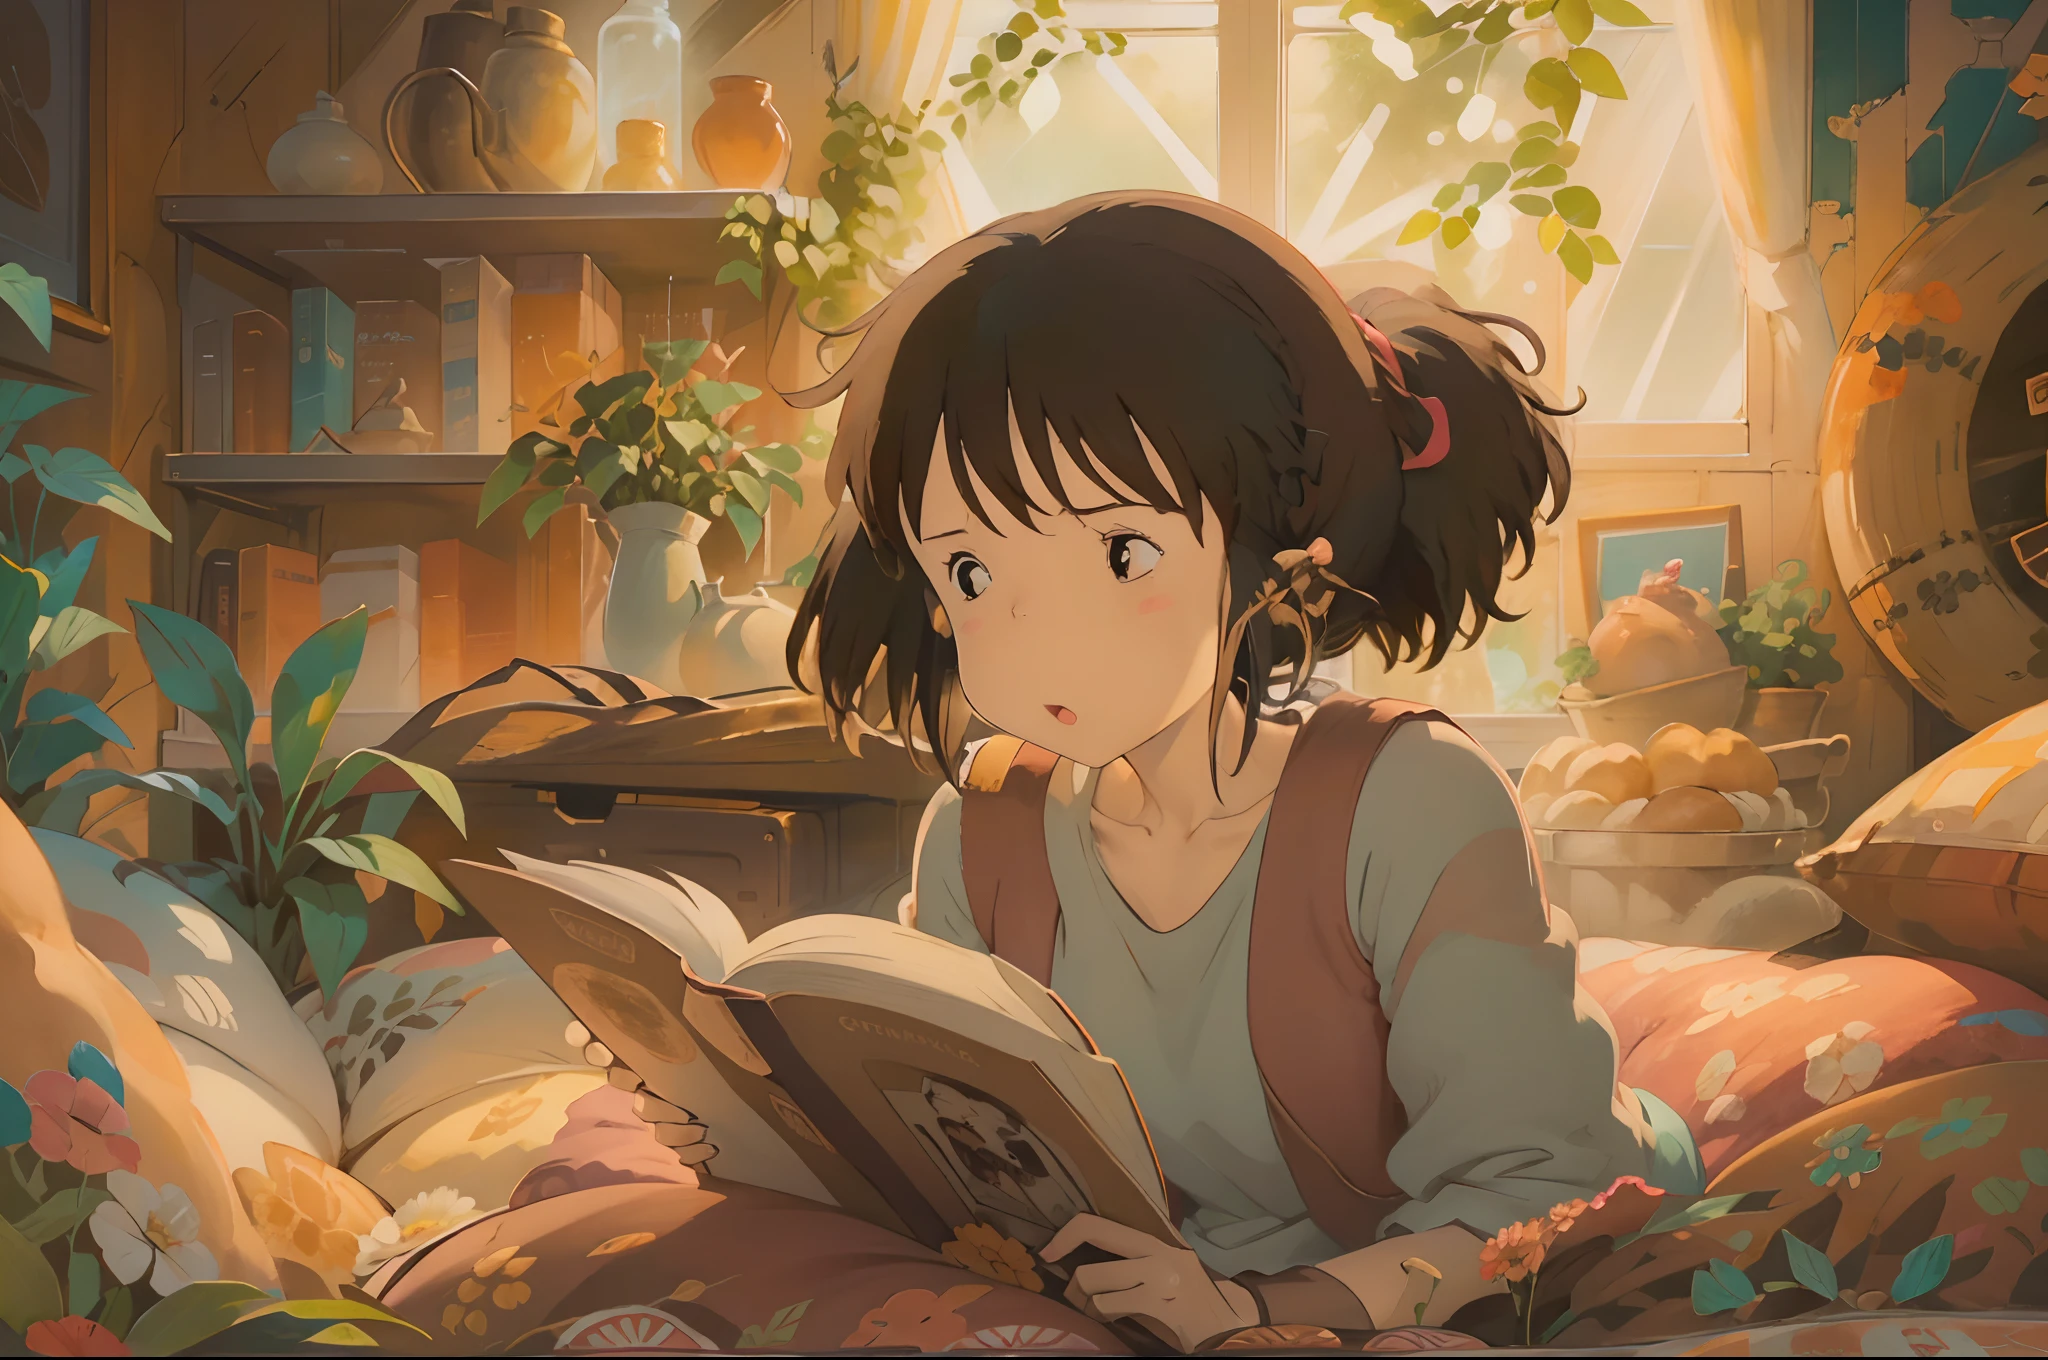 A digital illustration of 2 girls fully engrossed in reading on a comfortable bed, inspired by Hayao Miyazaki's style. The artwork should be filled with enchanting and captivating details, radiating a touch of fantasy. The girls should have beautiful, captivating eyes that are intricately detailed, as well as wonderfully delicate lips. The scene should be visually appealing, featuring a cozy and inviting environment.

The illustration should be created using various mediums, such as digital illustration, to enhance the overall visual effect. The attention to detail should be remarkable, ensuring that every element is depicted with utmost precision. The image should possess an extremely high quality, with a resolution of 4k or 8k, and be a masterpiece in its own right.

The style of the artwork should capture the essence of Hayao Miyazaki's renowned works, presenting a unique blend of imagination, storytelling, and vibrant visuals. The colors used should be warm and inviting, creating a soothing and cozy atmosphere. The lighting should be skillfully rendered, illuminating the scene in a soft and gentle manner.

Overall, the illustration should transport viewers into a world of wonder and magic, where they can fully immerse themselves in the joy of reading. The combination of Miyazaki's iconic style, enchanting details, warm tones, and a hint of fantasy should come together to create an awe-inspiring and captivating piece of art.